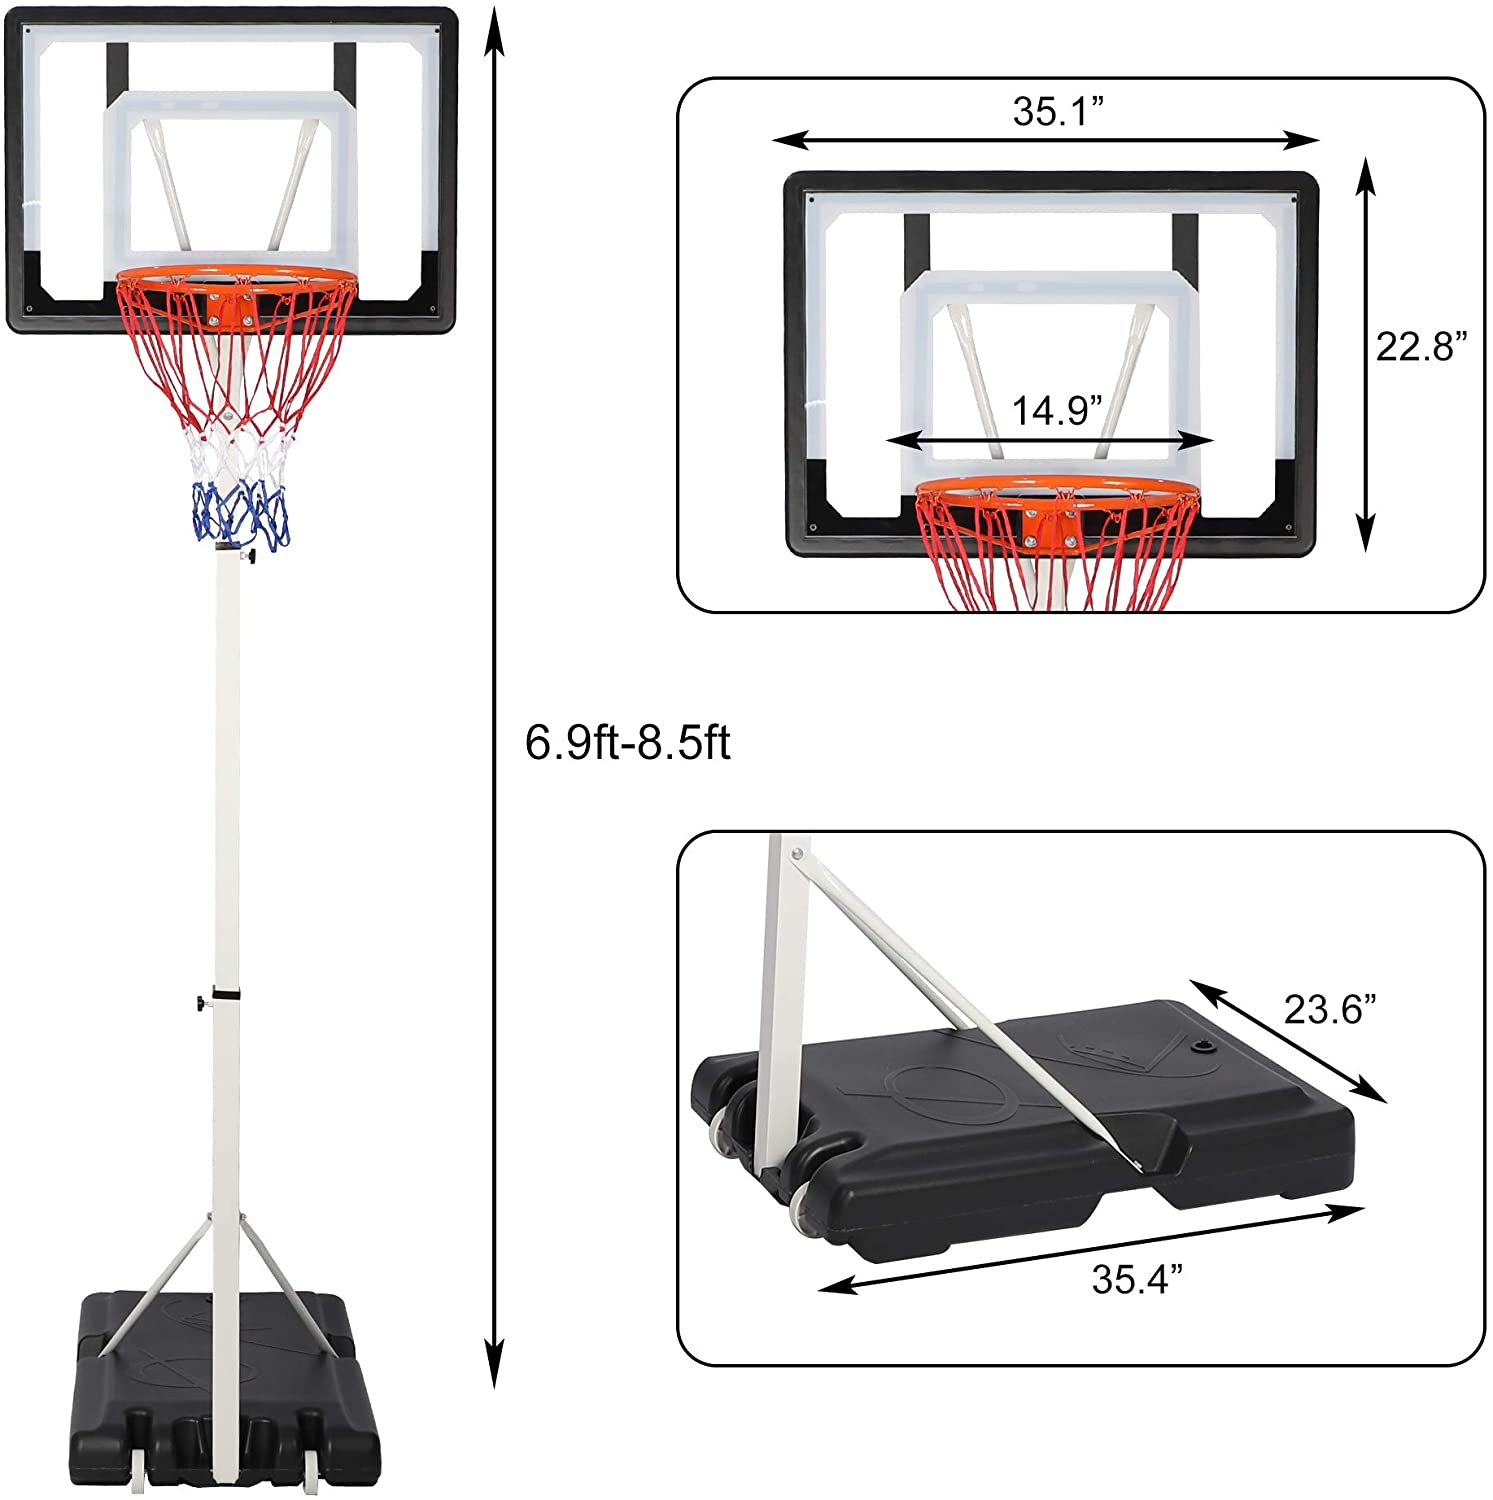 Portable Basketball Hoop Backboard System Stand Outdoor Sports Equipment Height Adjustable 6.9Ft-8.5Ft with Wheels